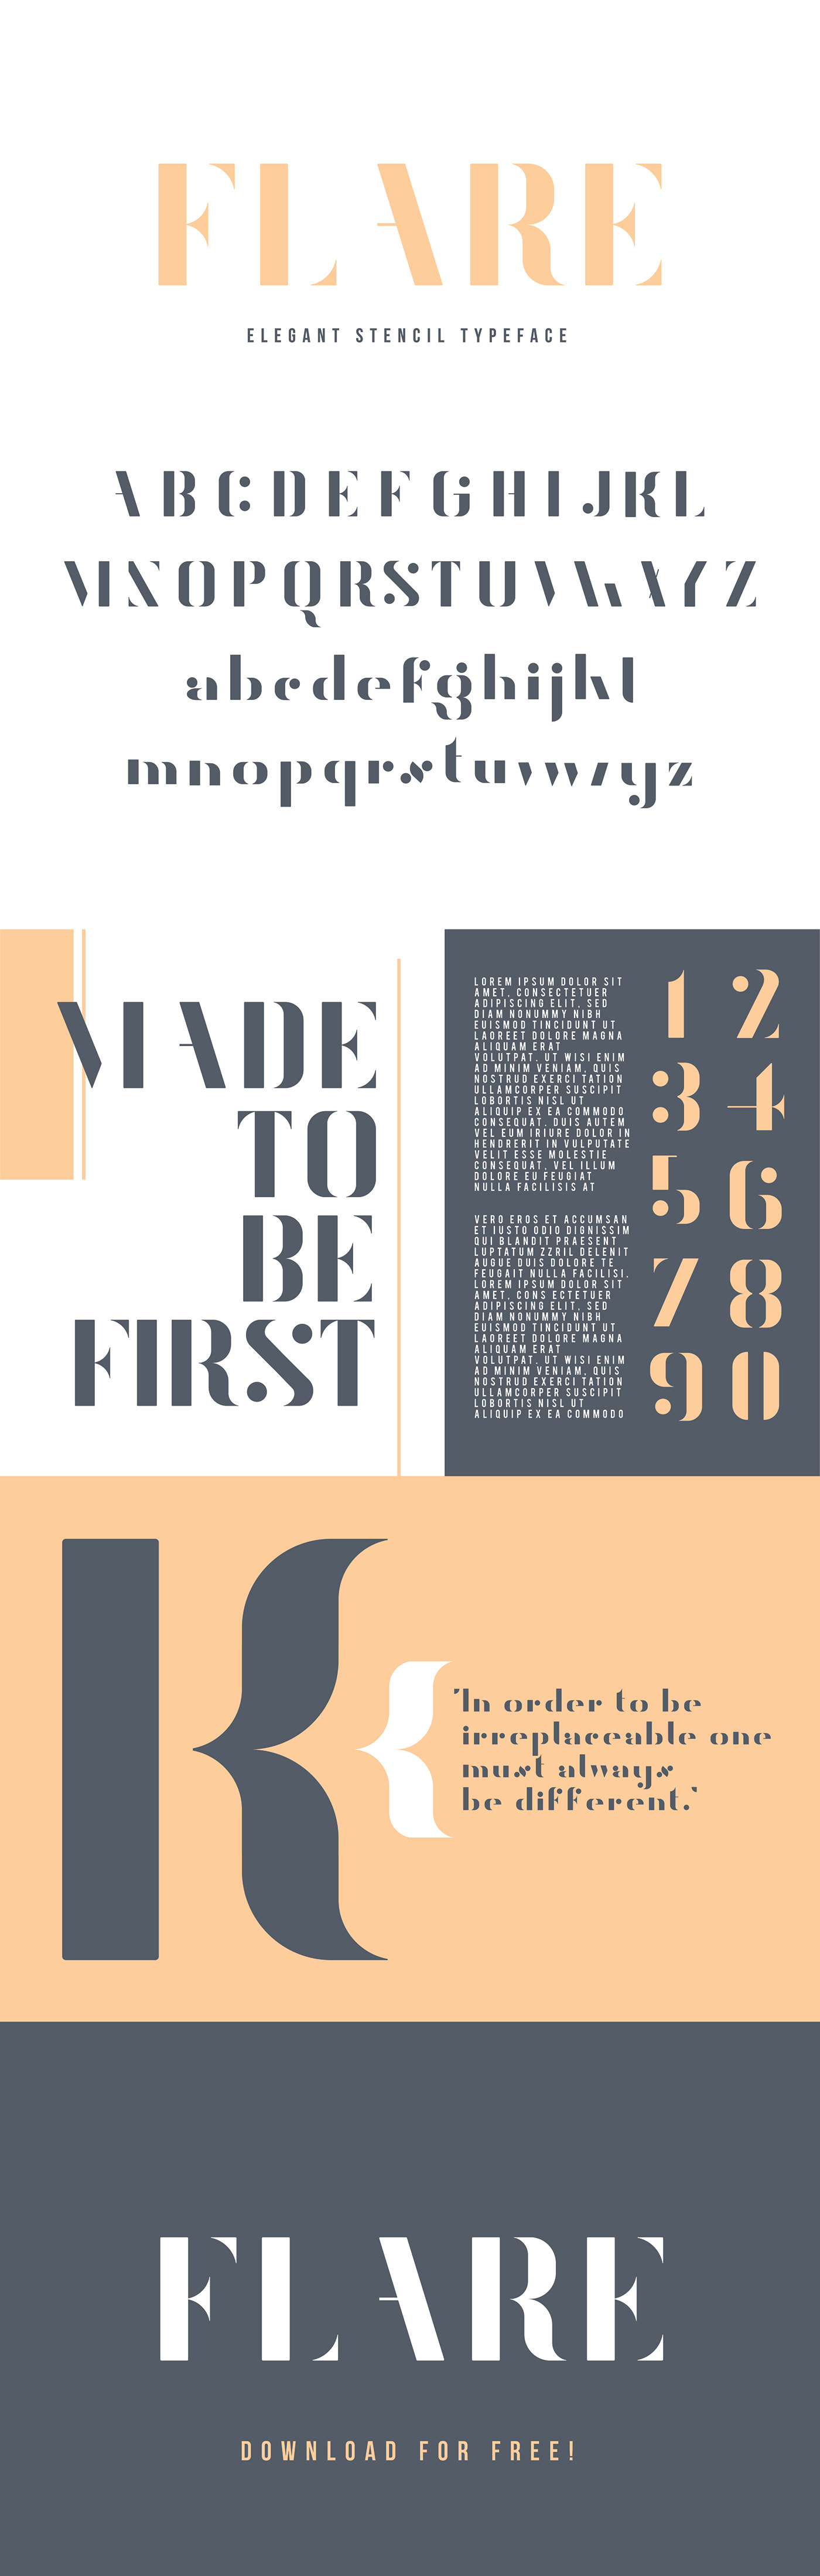 Download Free Flare Font Free Fonts Download